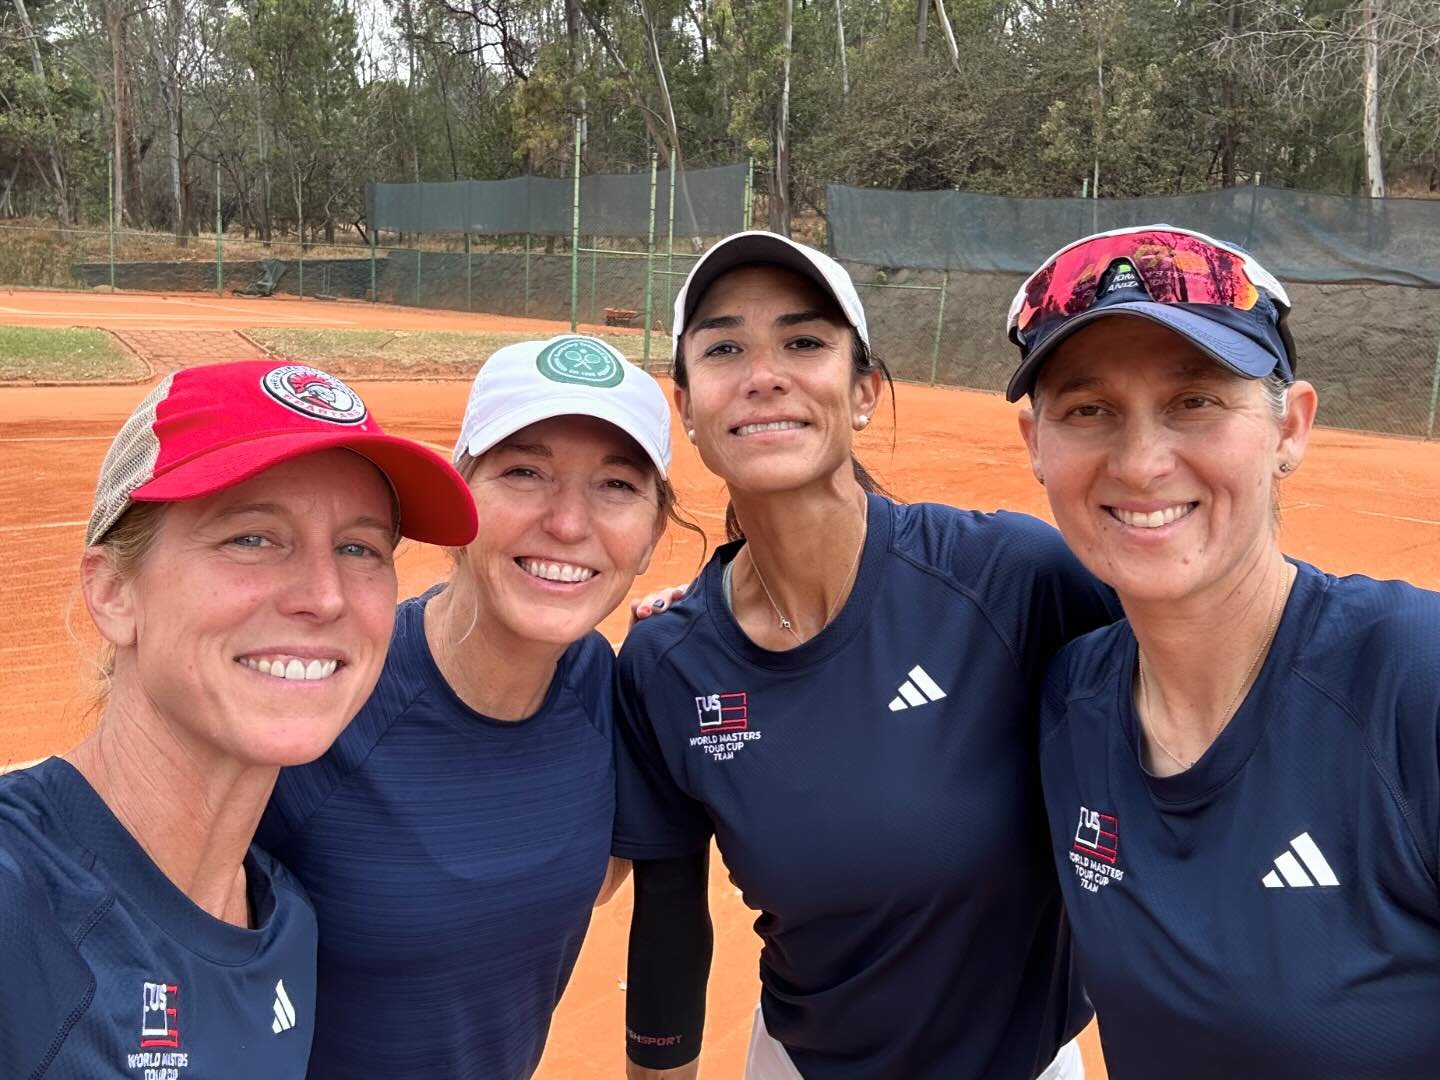 The USA 50/55/60 Cup teams began play today in Mexico City! Sending luck down south to you all for a great week. 🇺🇸 

50s: Amanda Parson-Siegel, Heather Waters, Isabela Iantosca, Julie Silveria
55s: Debbie Spence-Nasim, Julie Cass, Ros Nideffer, Ju